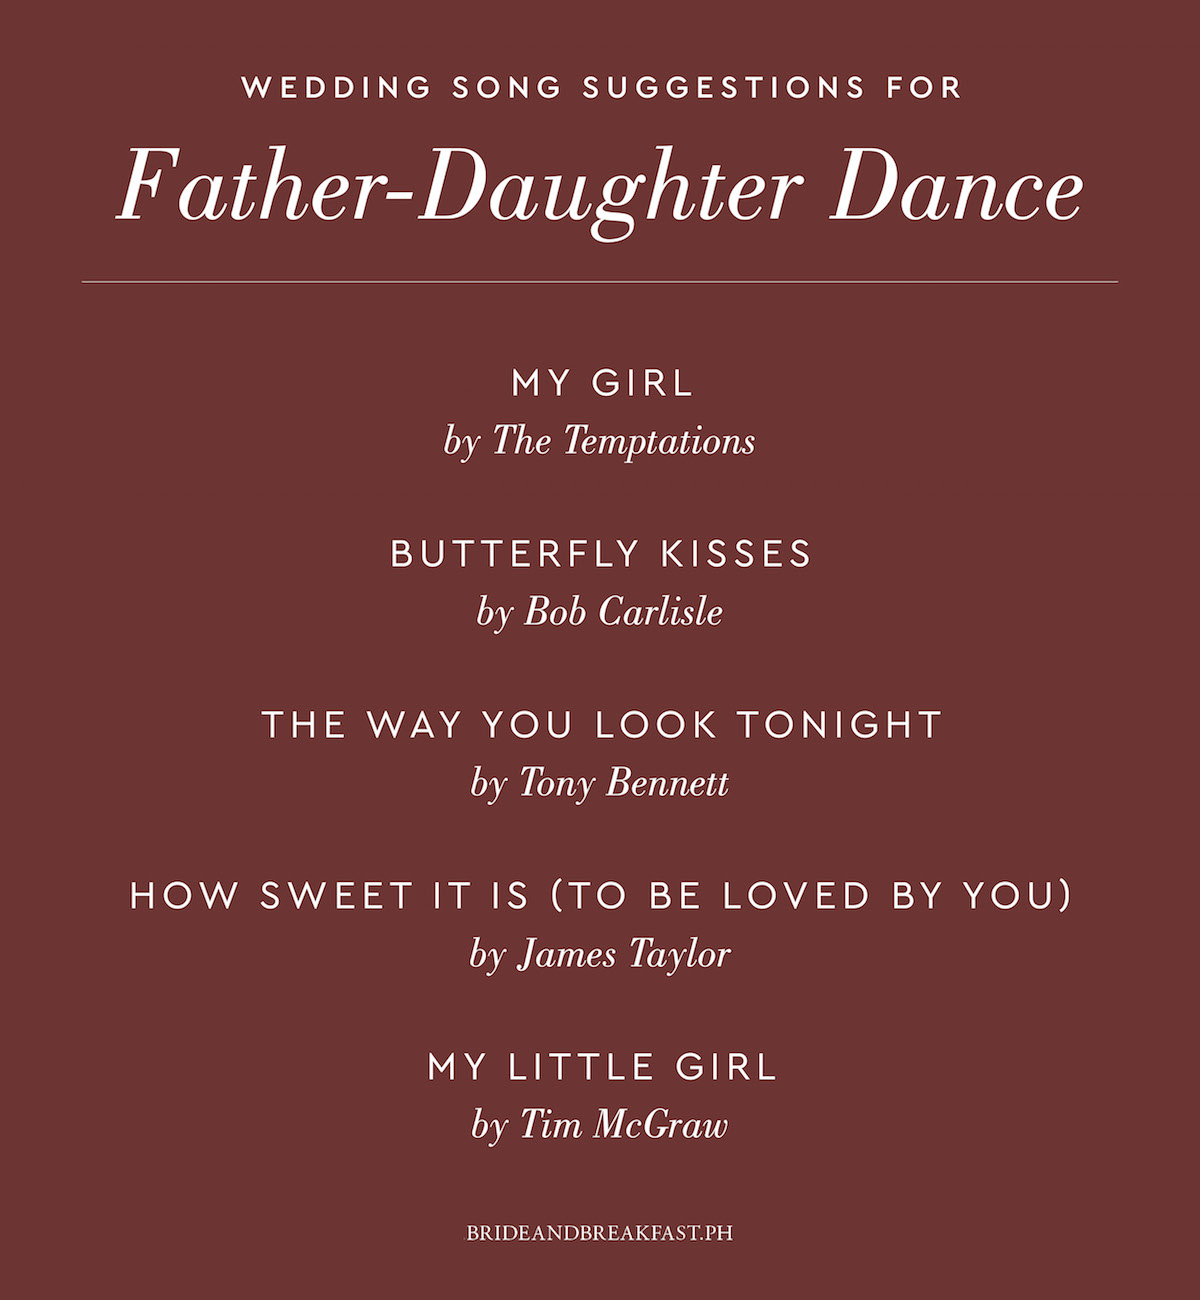 My Girl by The Temptations Butterfly Kisses by Bob Carlisle The Way You Look Tonight by Tony Bennett How Sweet It Is (To Be Loved By You) by James Taylor My Little Girl by Tim McGraw